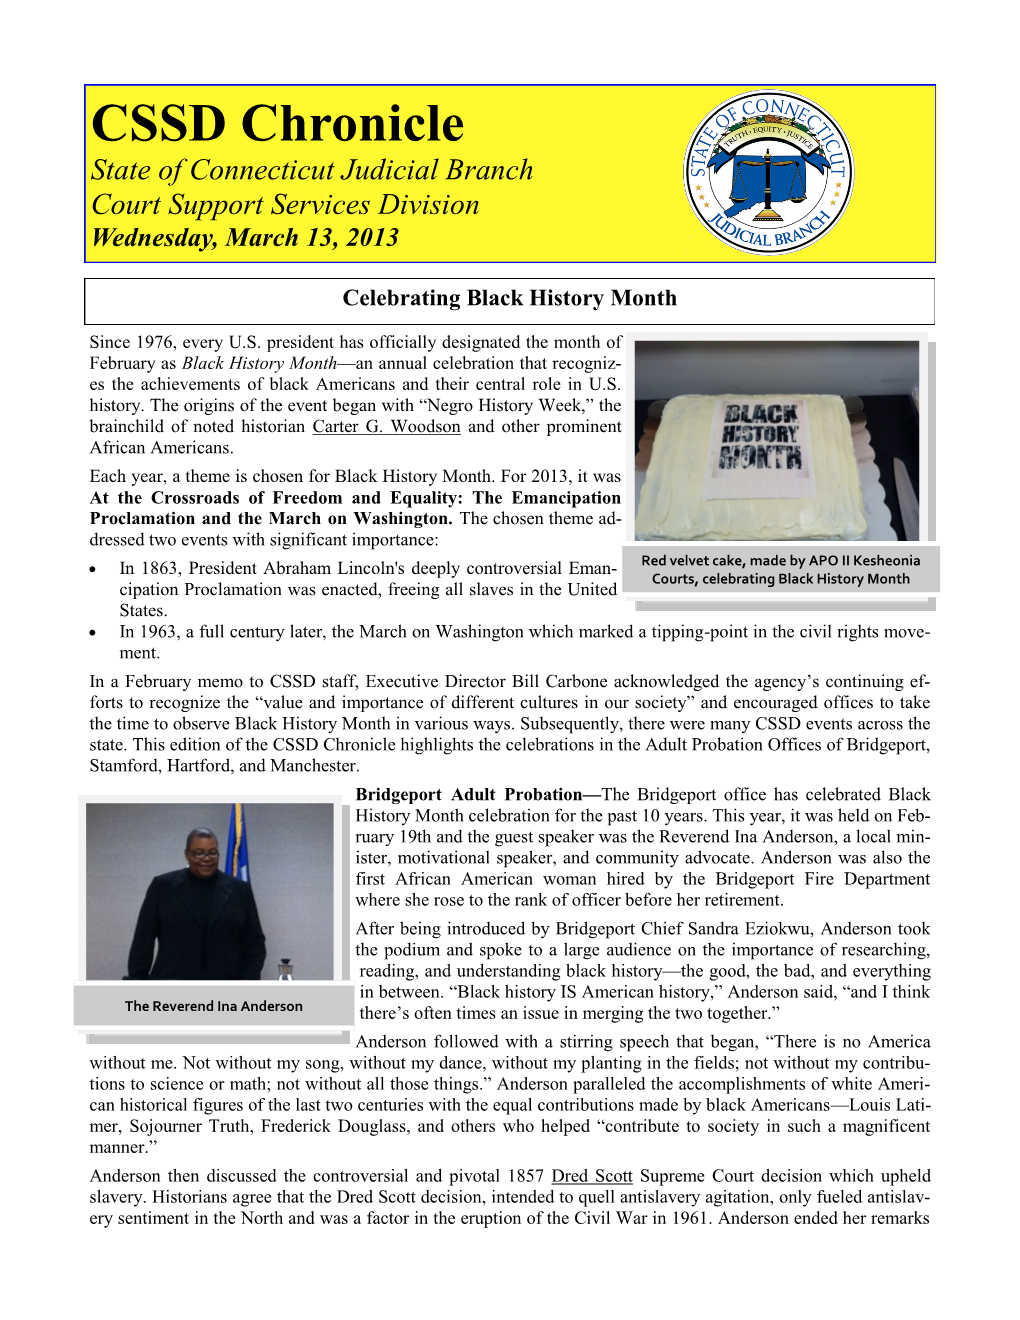 CSSD Chronicle, Wednesday, March 13, 2013